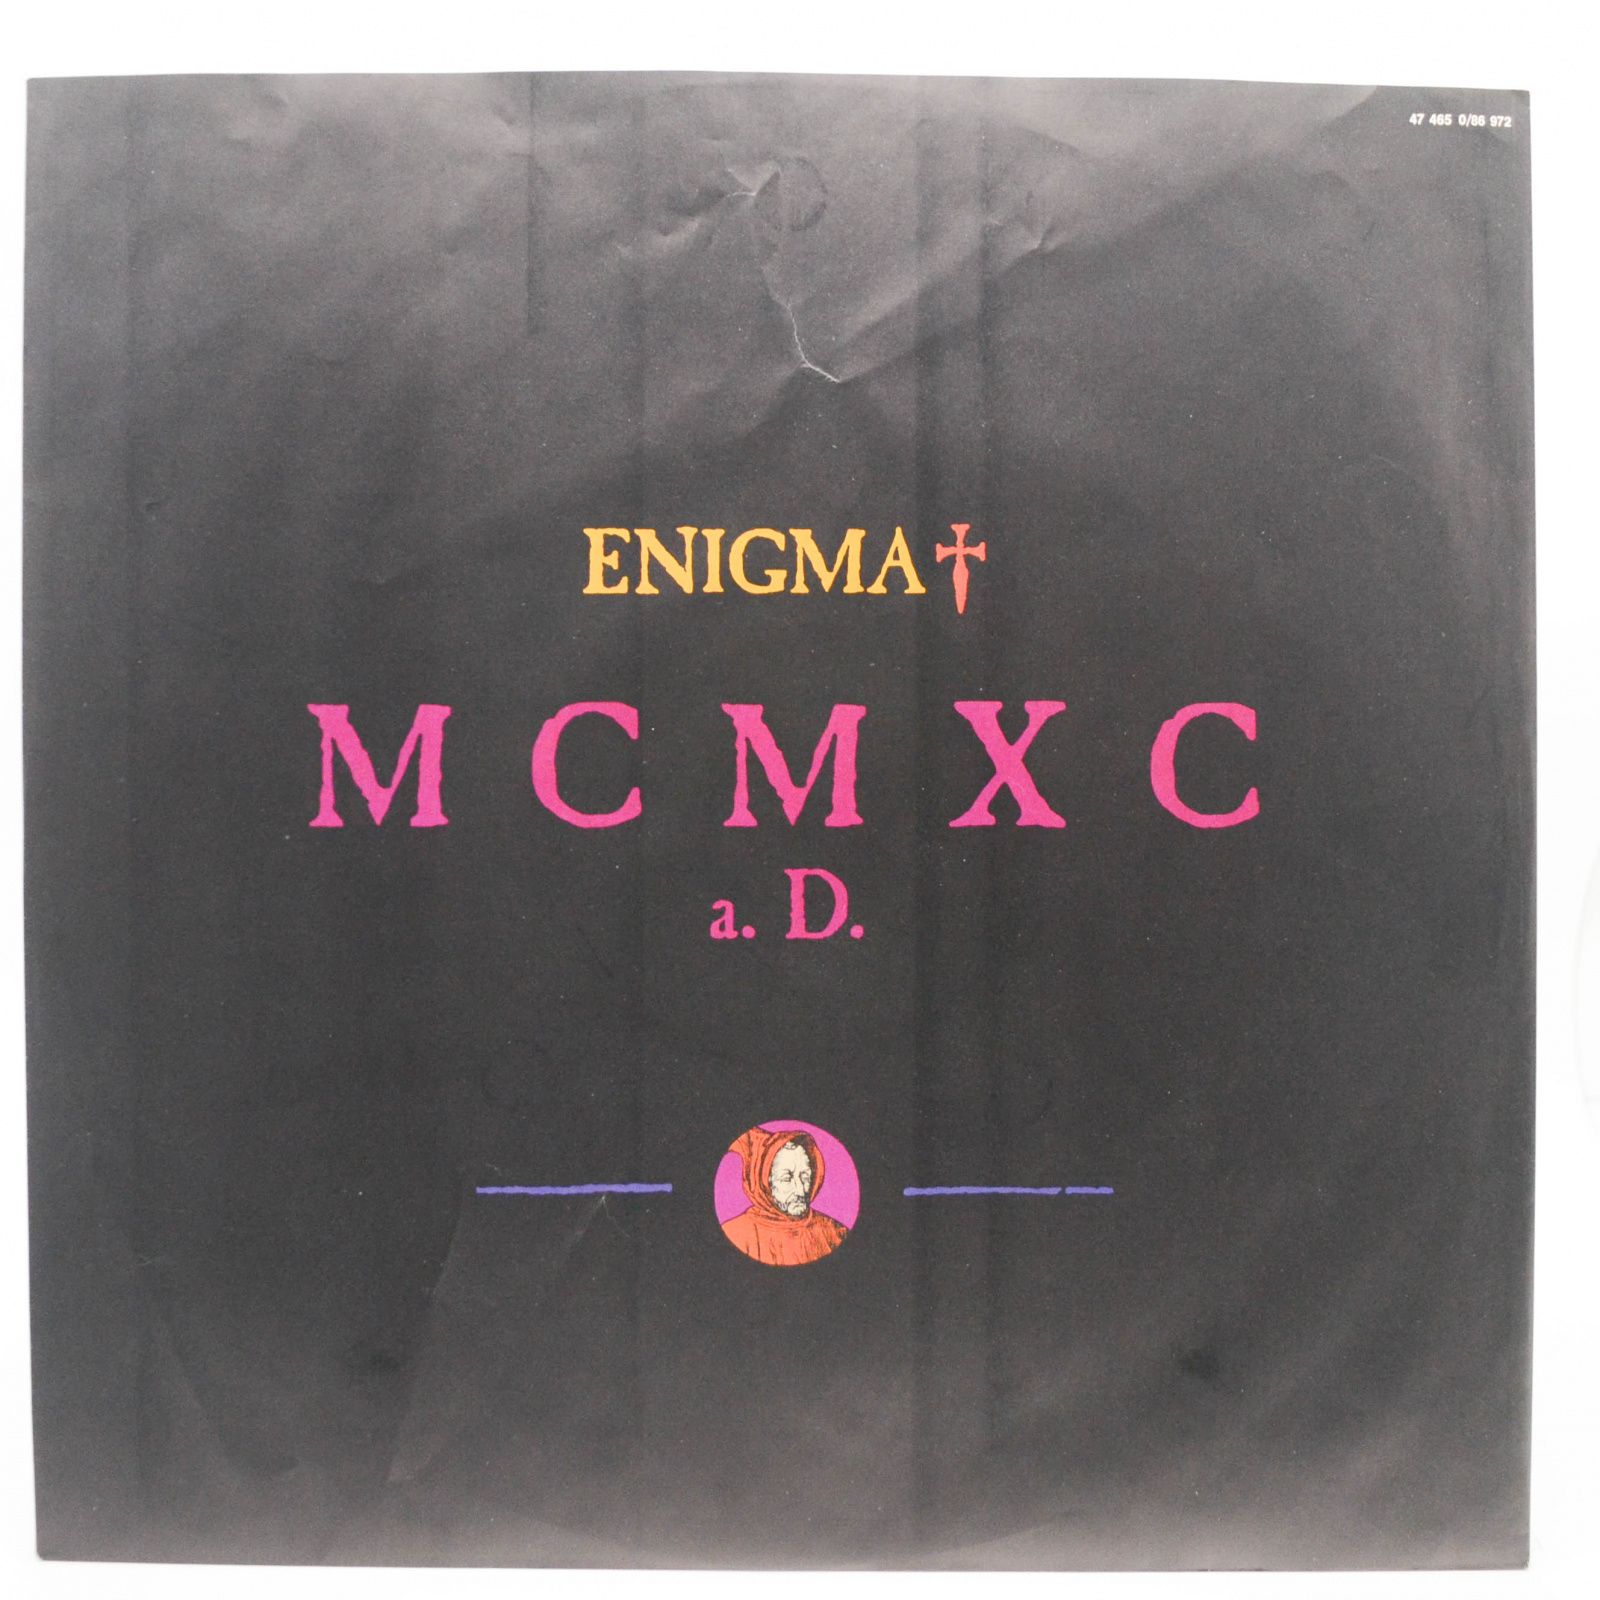 Enigma — MCMXC a.D., 1990